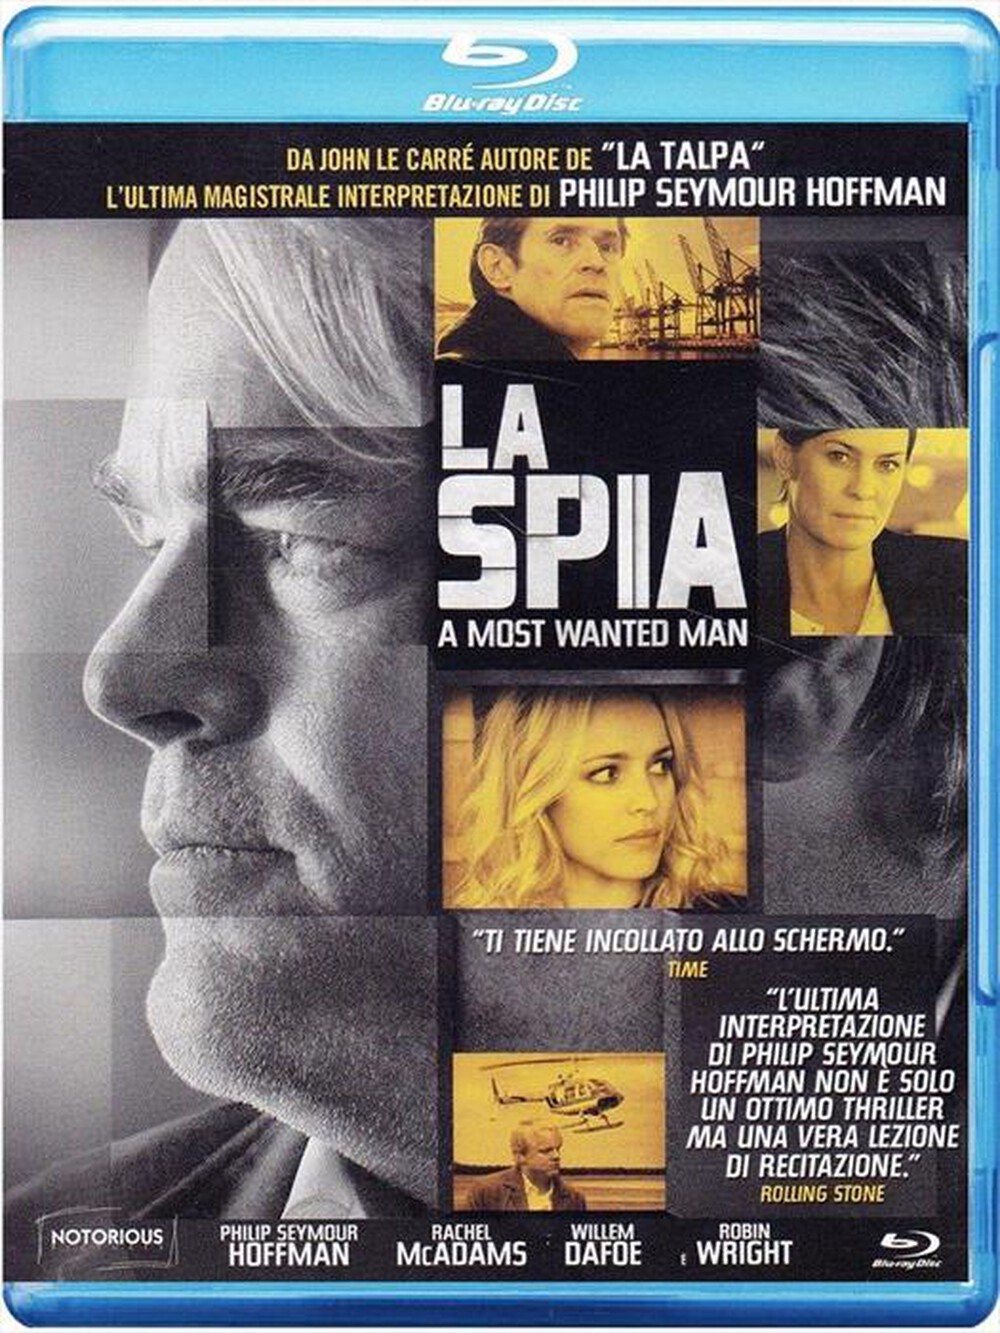 "EAGLE PICTURES - Spia (La) - A Most Wanted Man - "